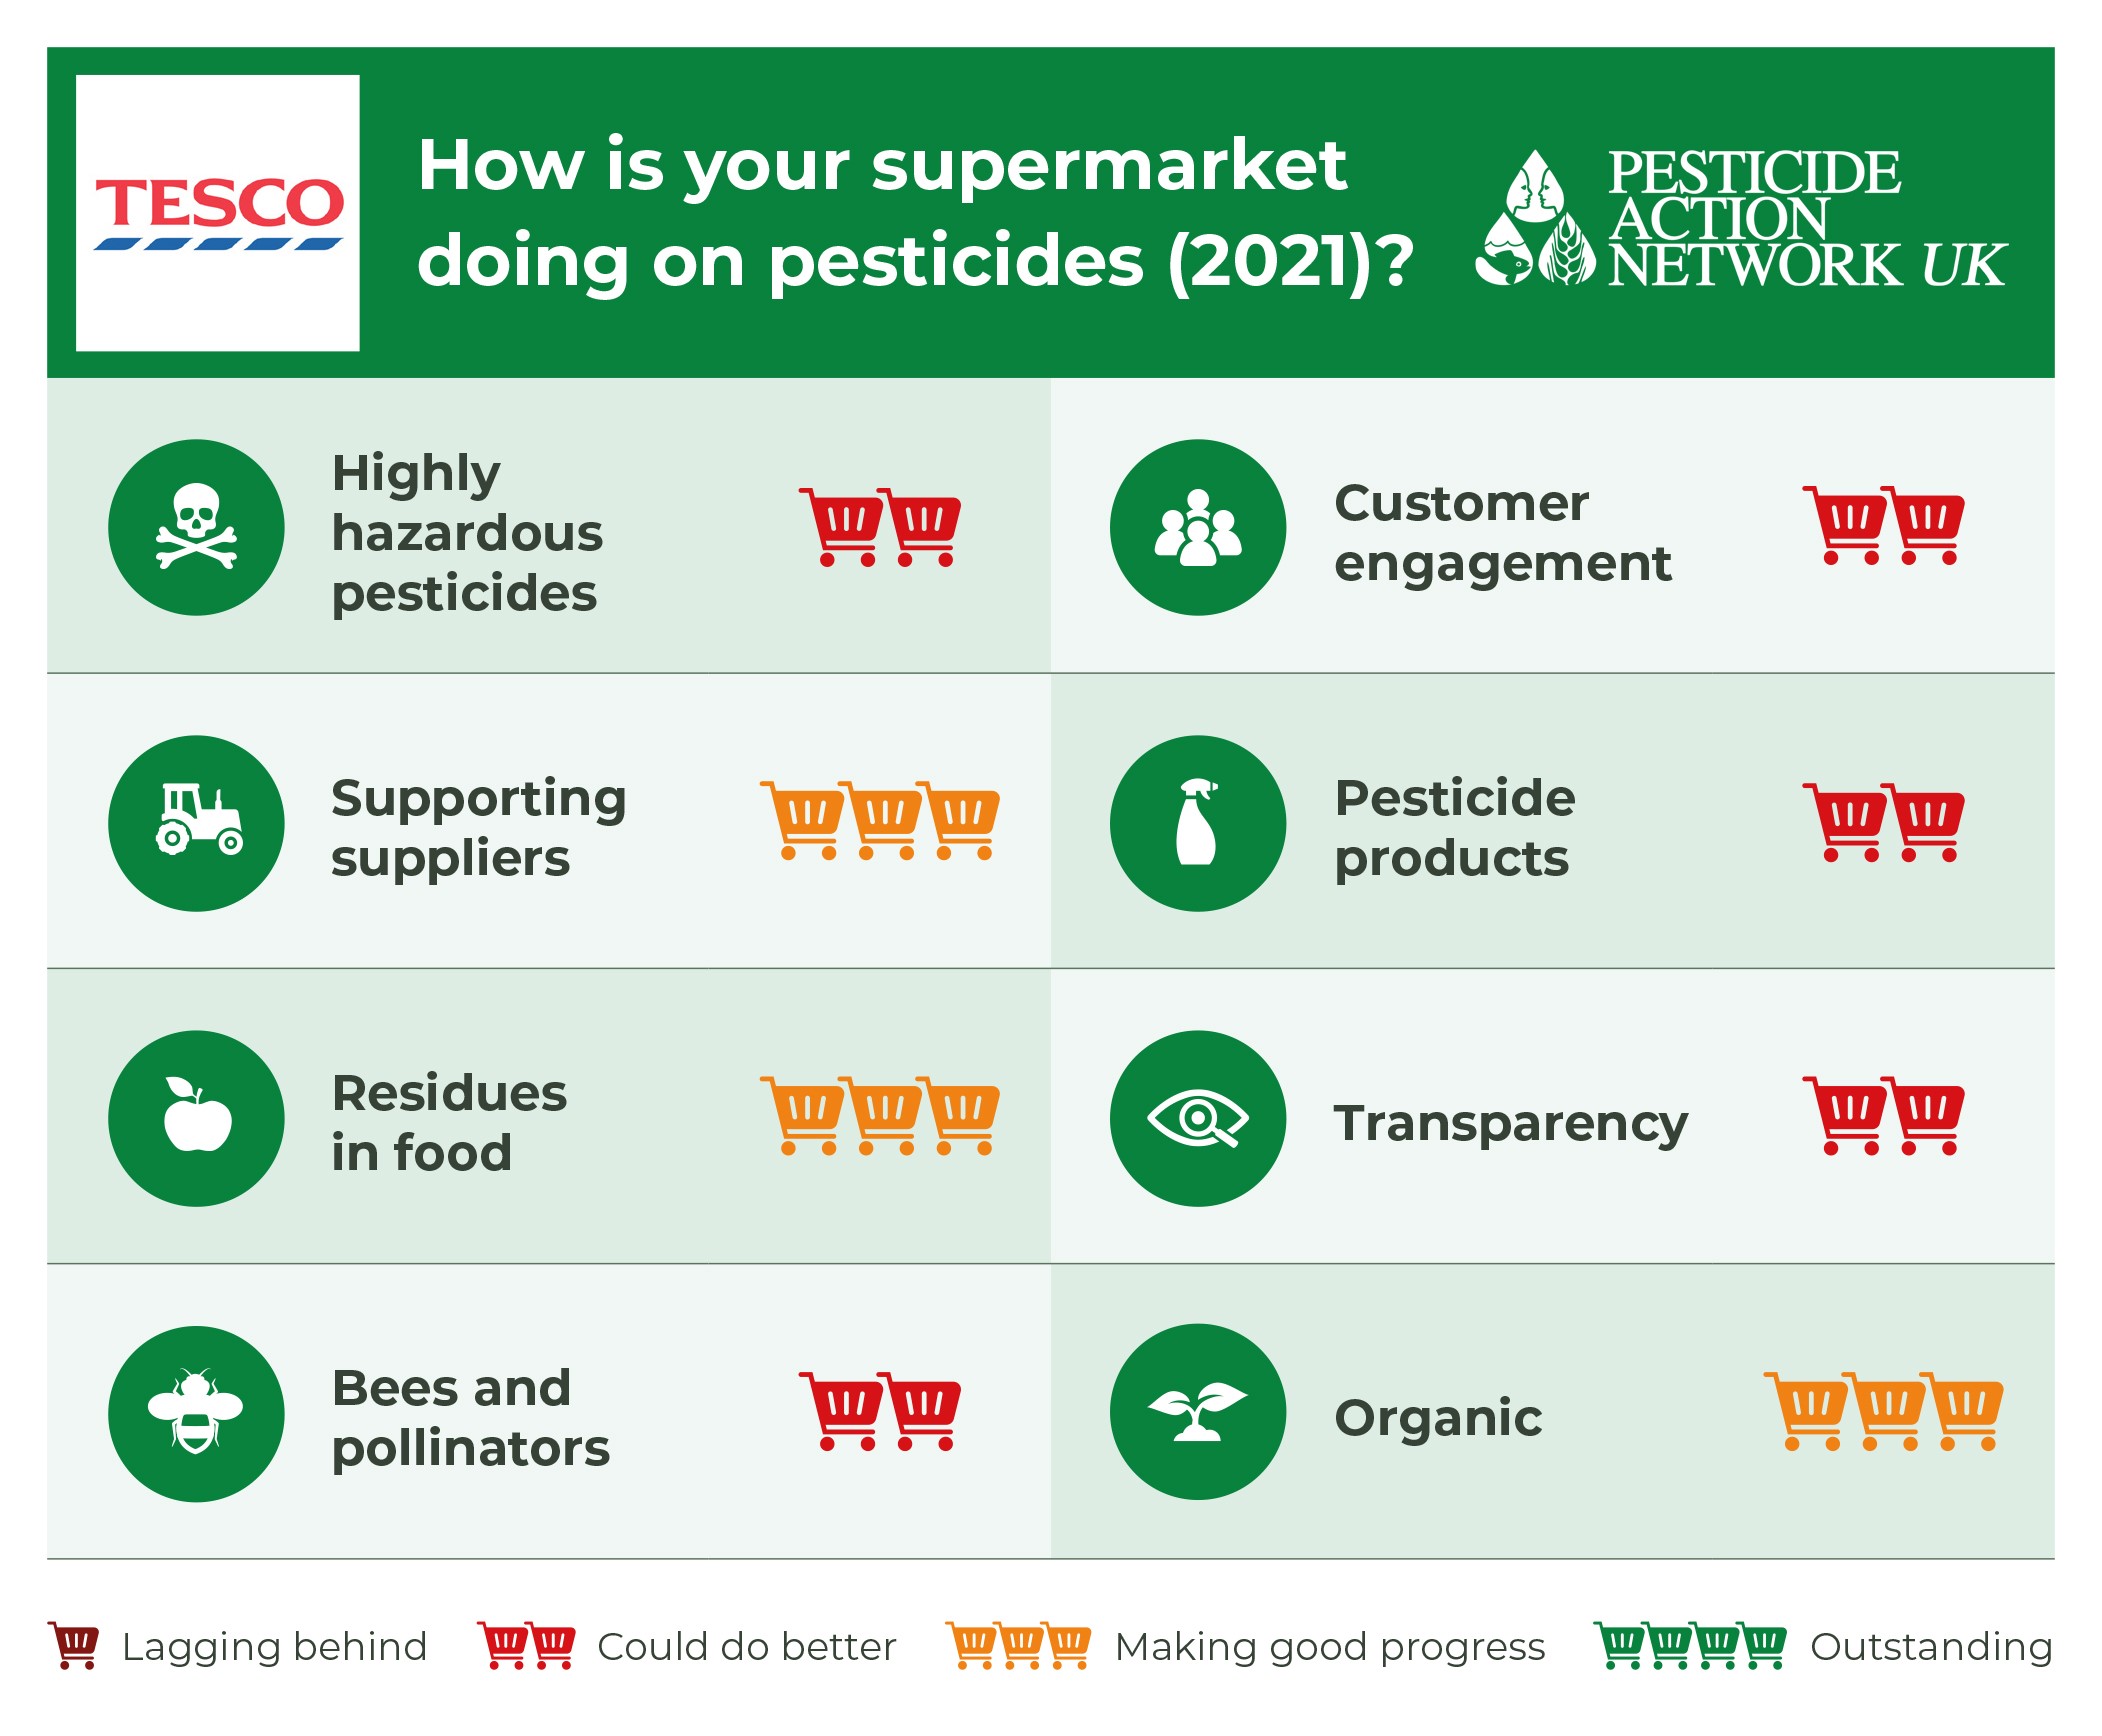 How is Tesco doing on pesticides?